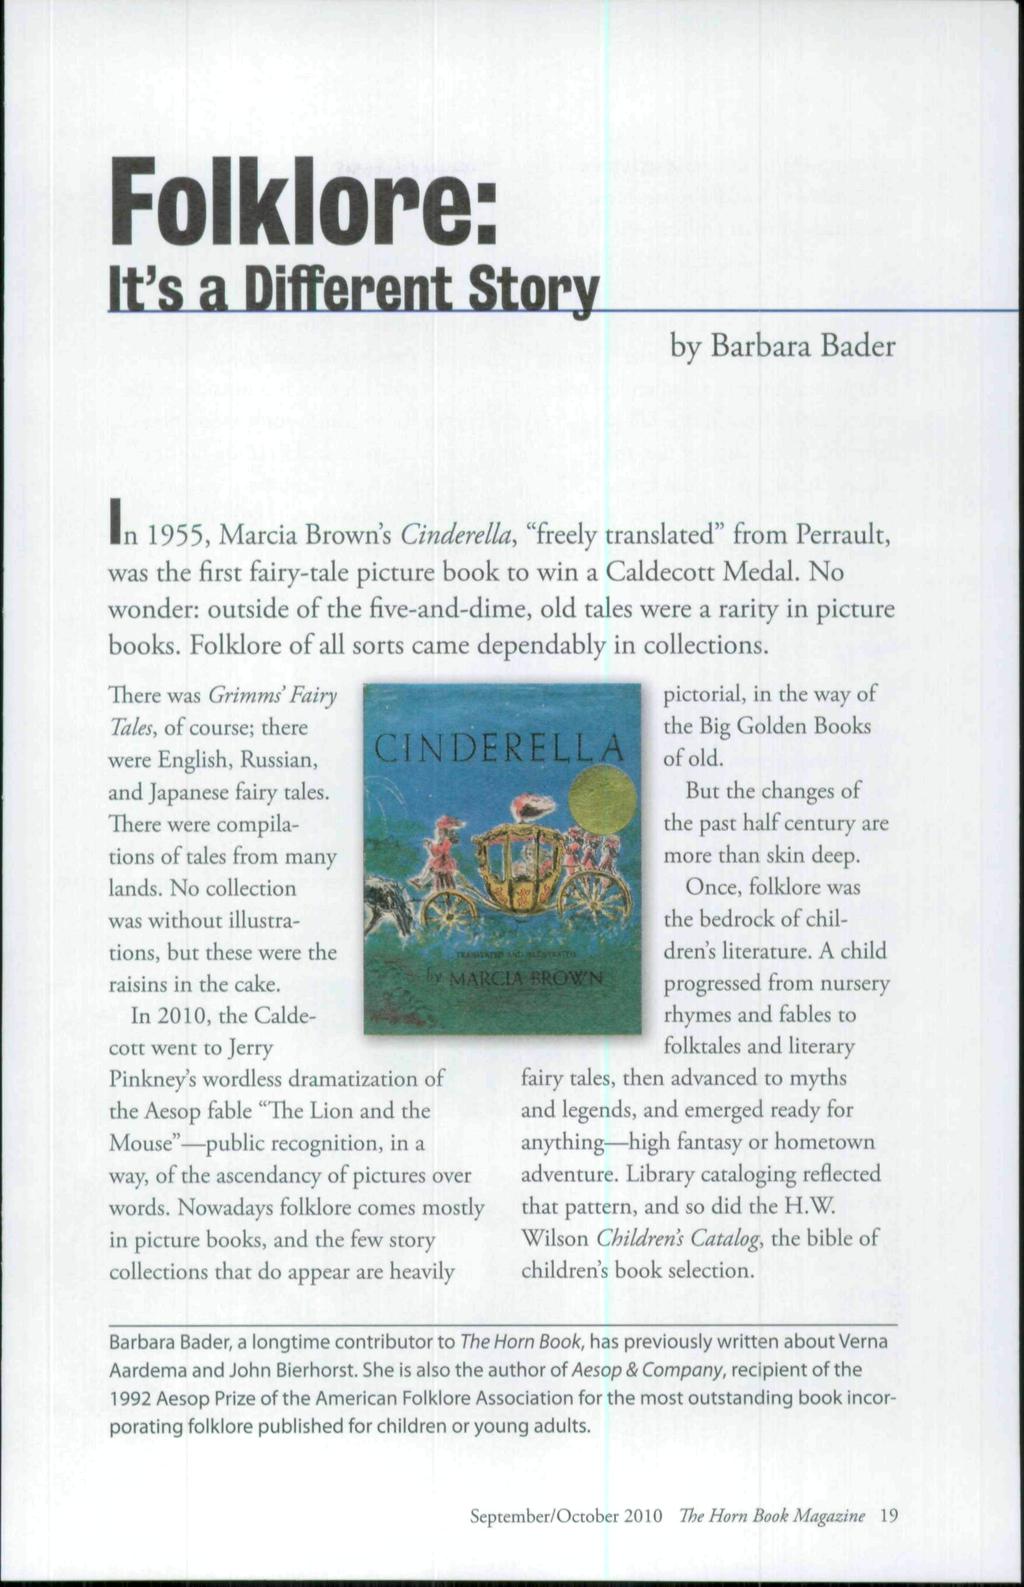 Folklore: by Barbara Bader In 1955, Marcia Brown's Cinderella, "freely translated" from Perrault, was the first fairy-tale picture book to win a Caldecott Medal, No wonder: outside of the